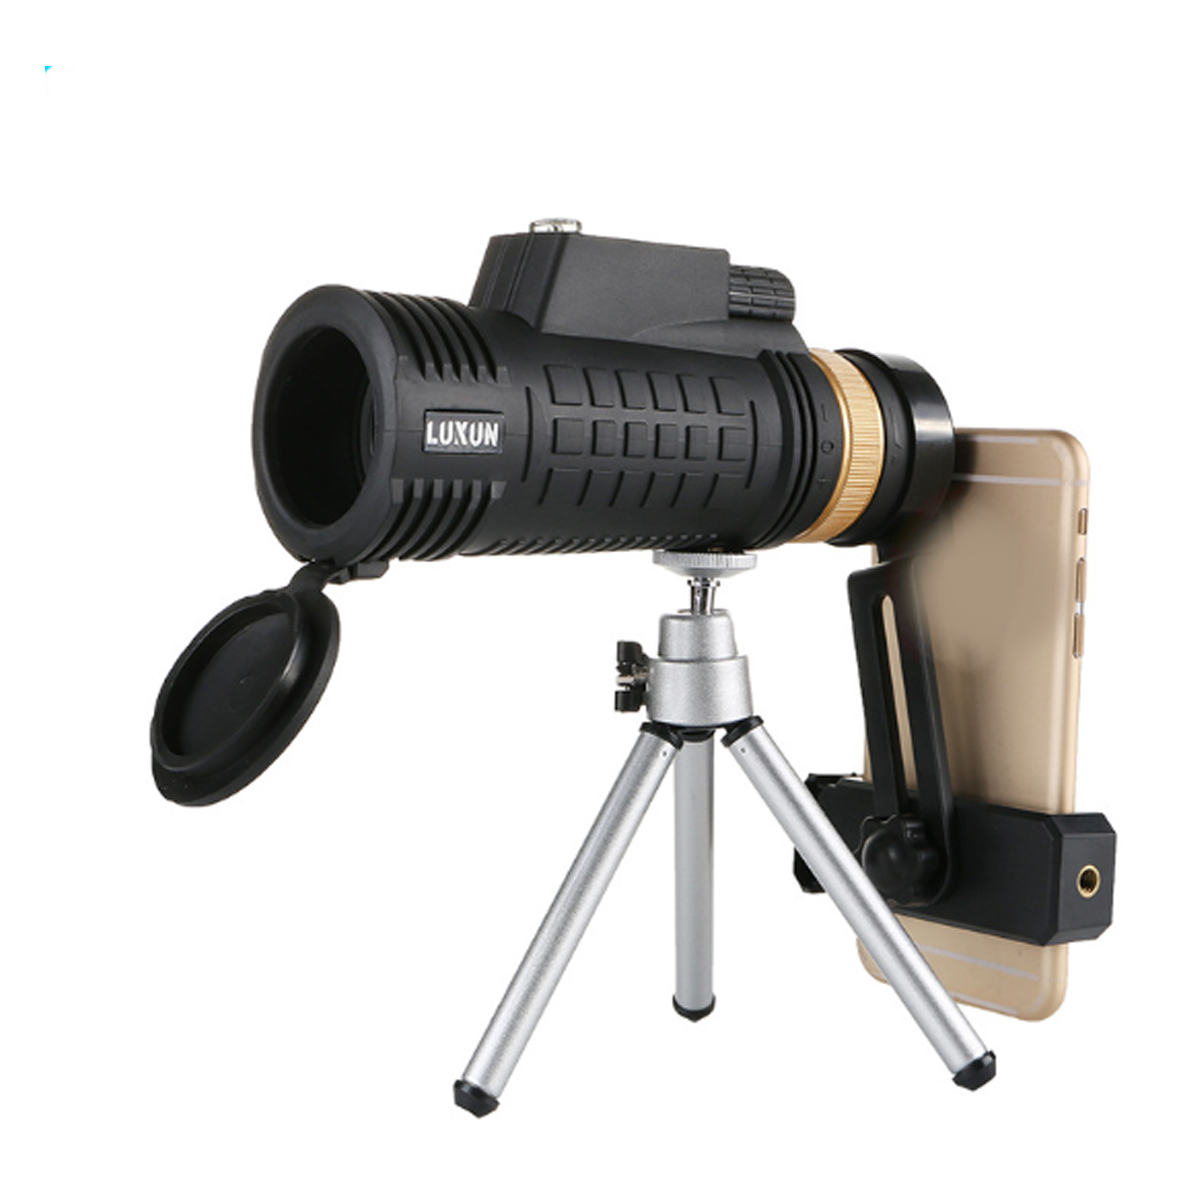 18x62-Outdoor-Compass-Monocular-HD-Optic-Day-Night-Vision-Phone-Telescope-Cmaping-Travel-1412184